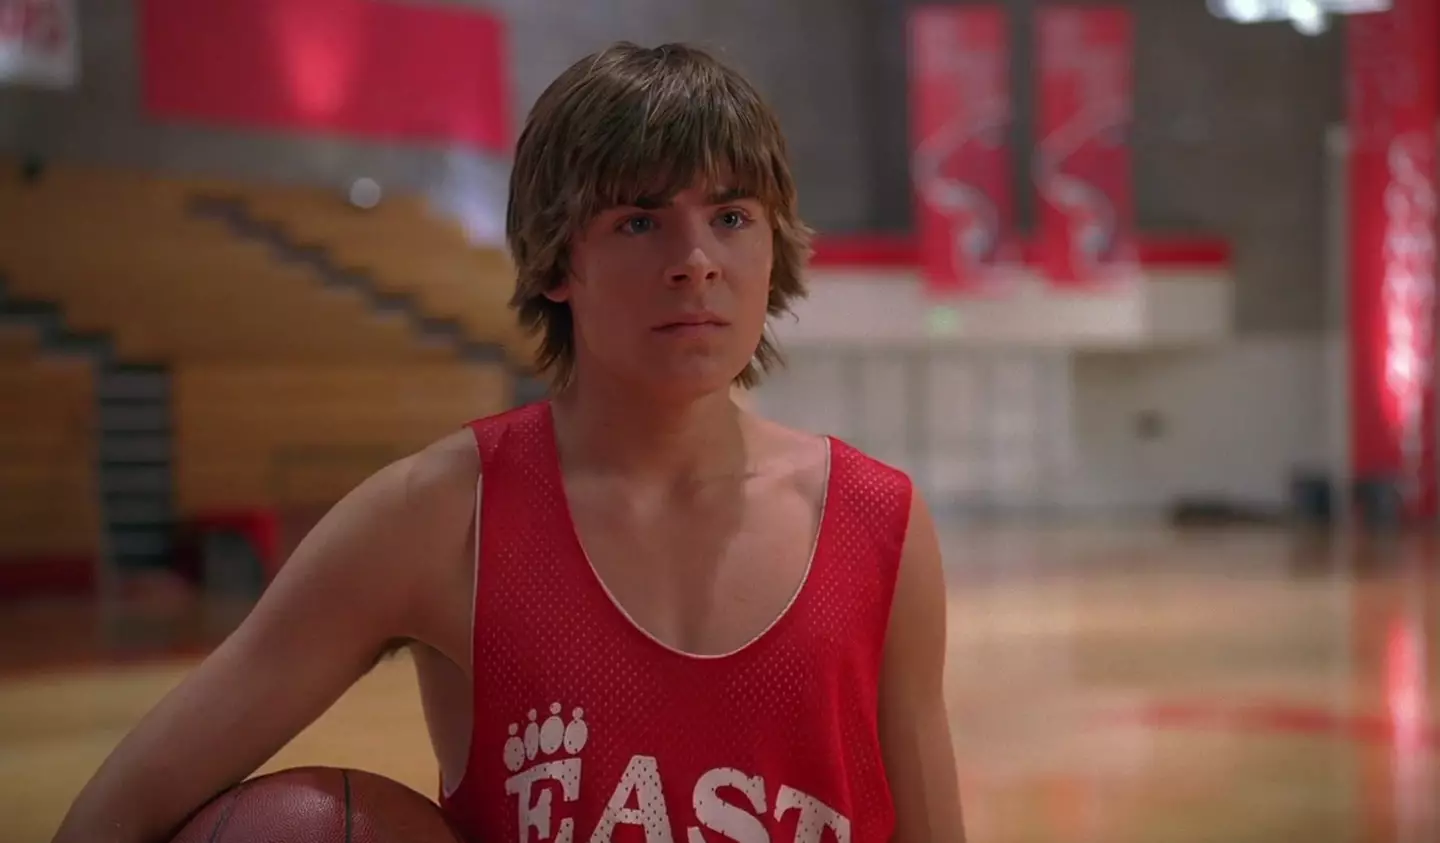 There is a very bizarre link between Breaking Bad's Jesse Pinkman and High School Musical's Troy Bolton.